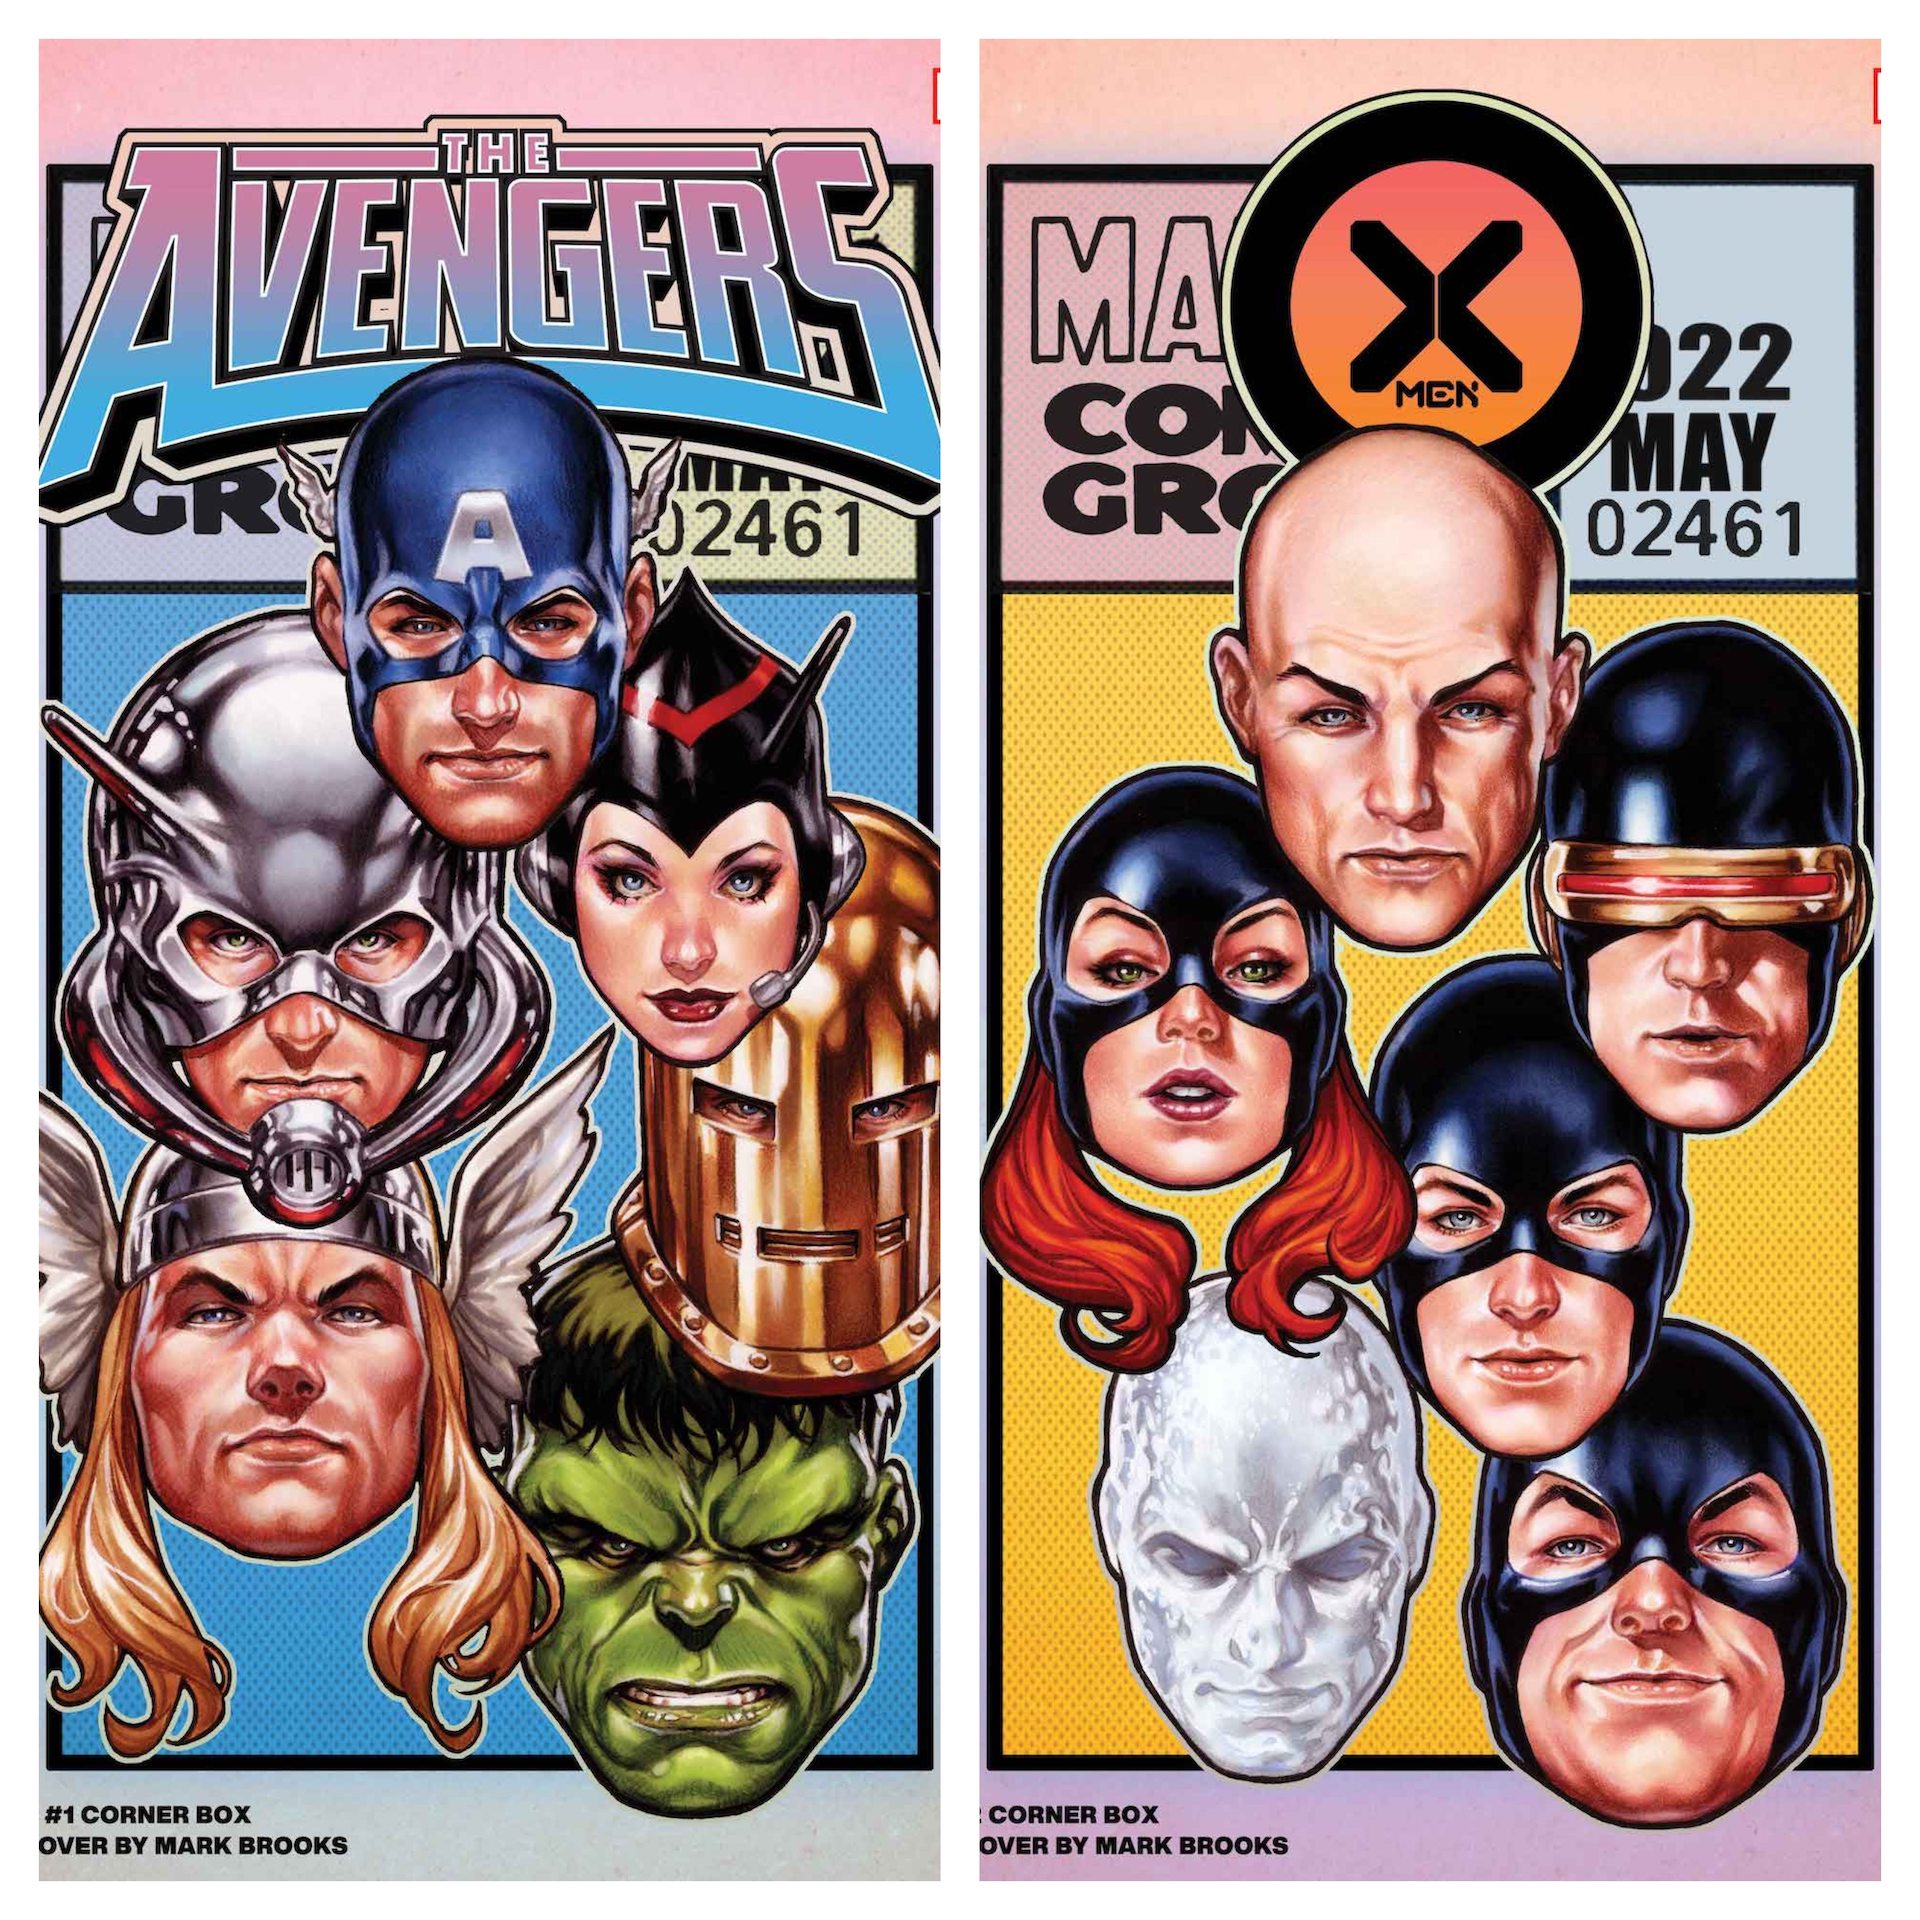 Mark Brooks corner box Avengers and X-Men variant covers revealed for May 17th